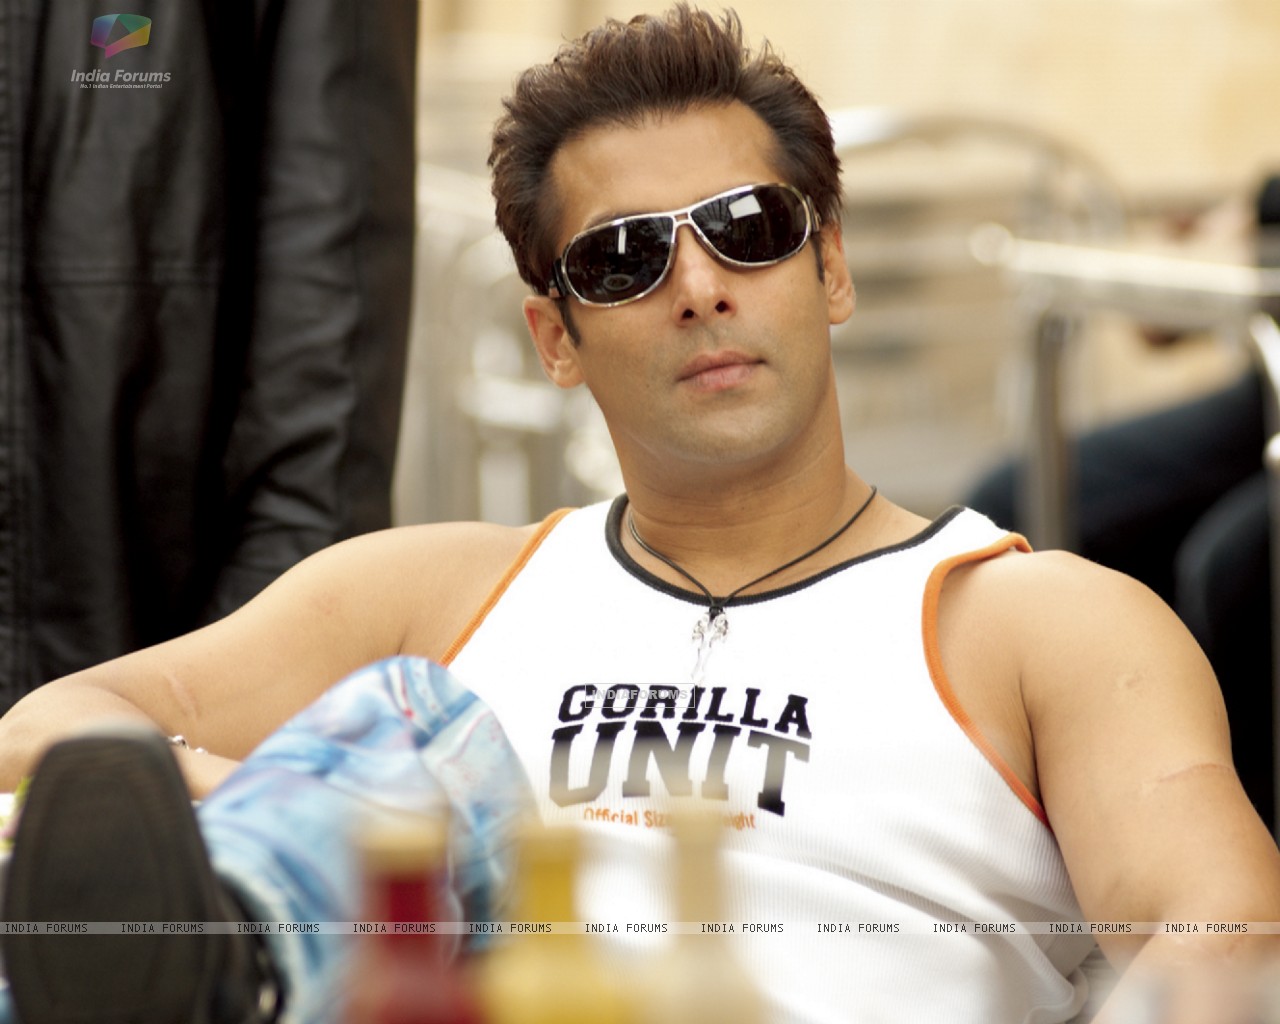 The image “http://img.india-forums.com/wallpapers/1280x1024/11419-hot-and-handsome-salman-khan.jpg” cannot be displayed, because it contains errors.